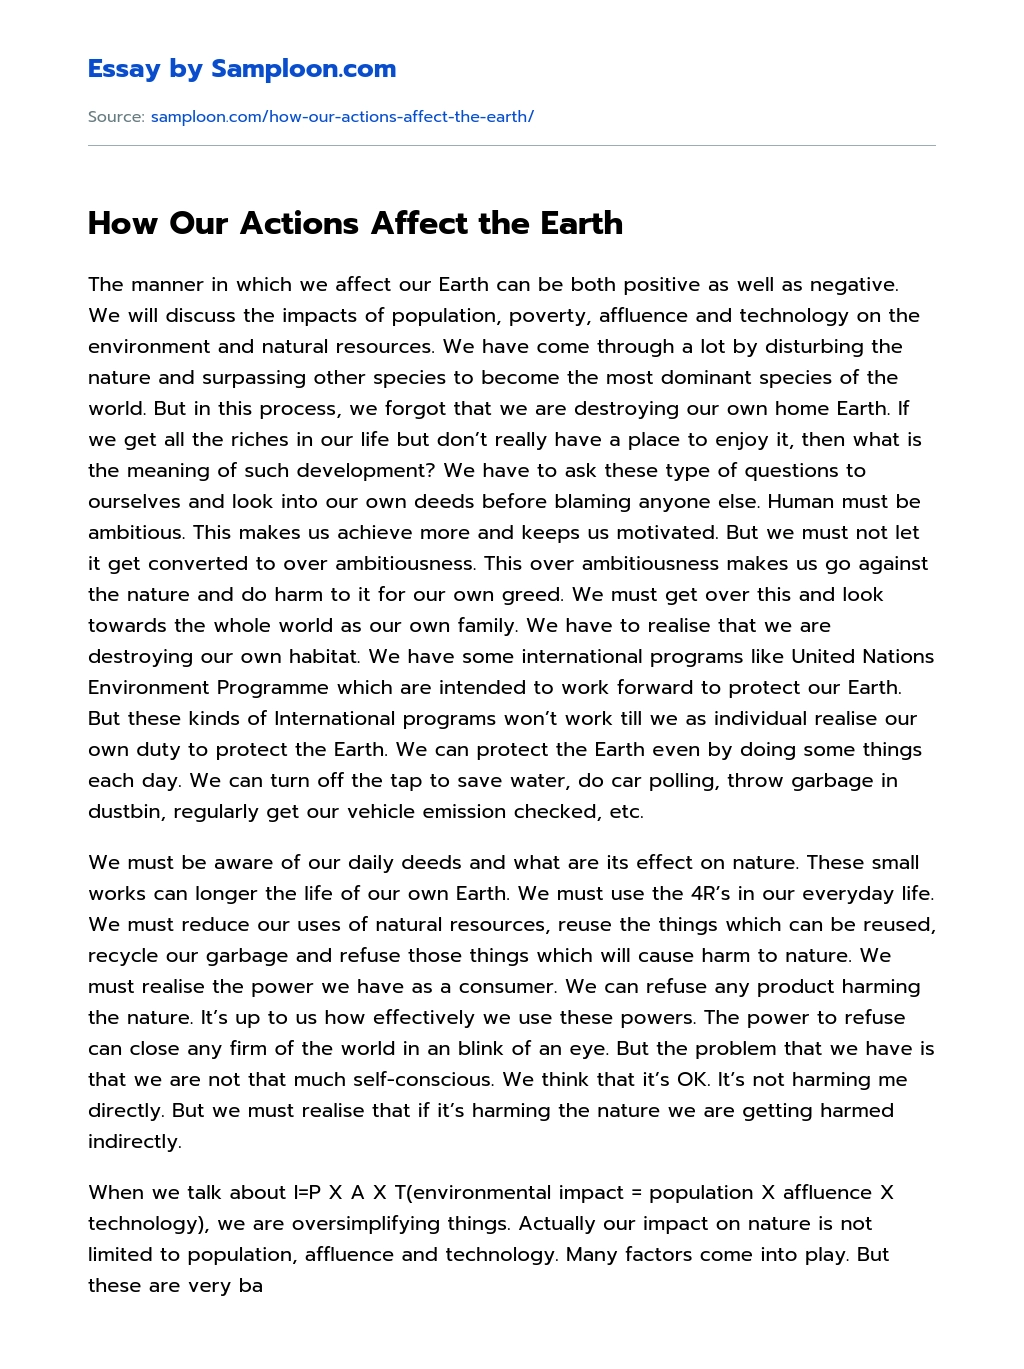 How Our Actions Affect the Earth essay